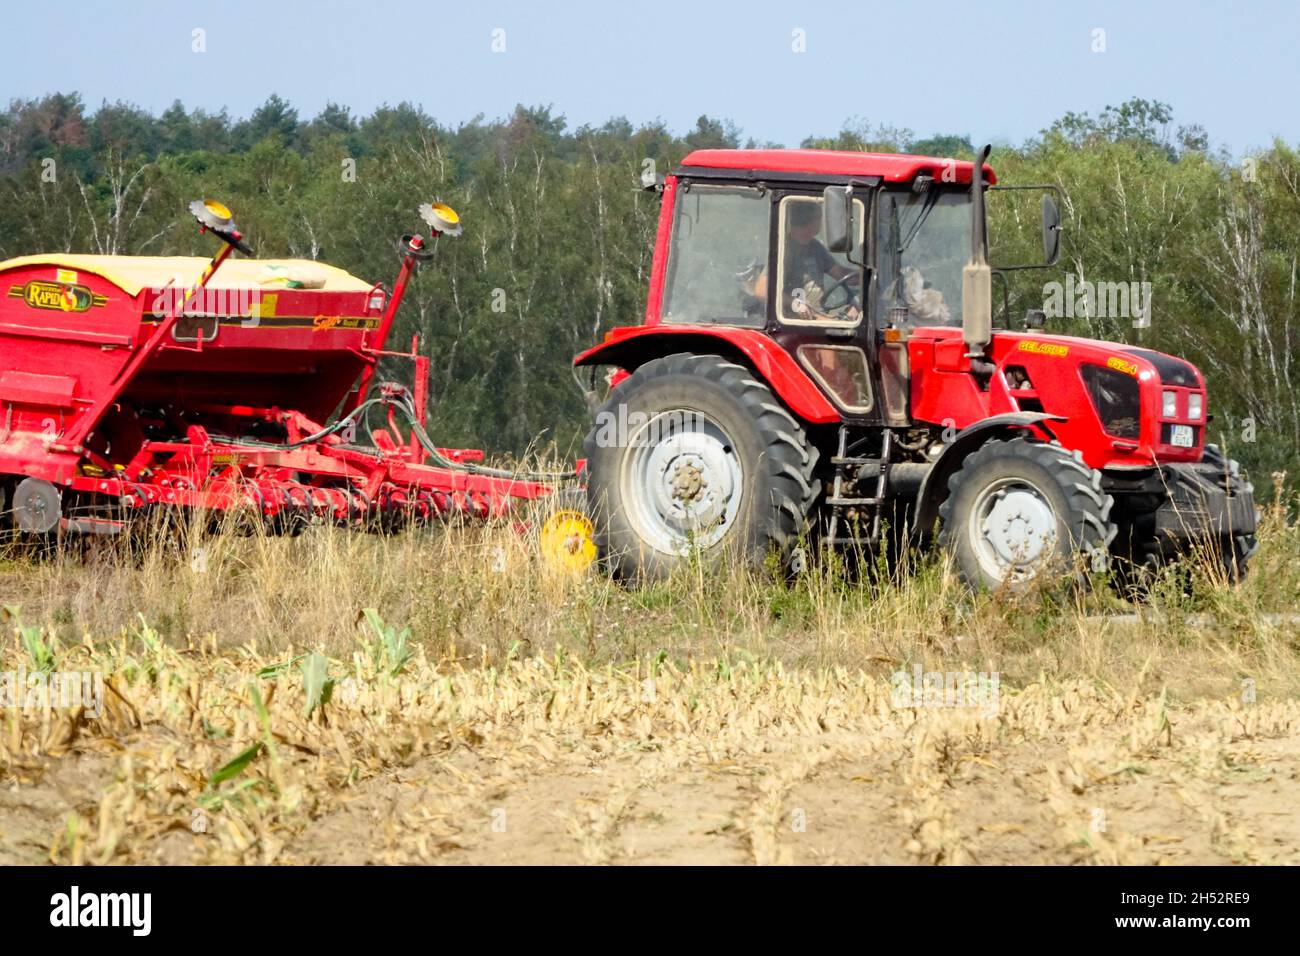 Seeder agricultural machinery Germany farming Stock Photo